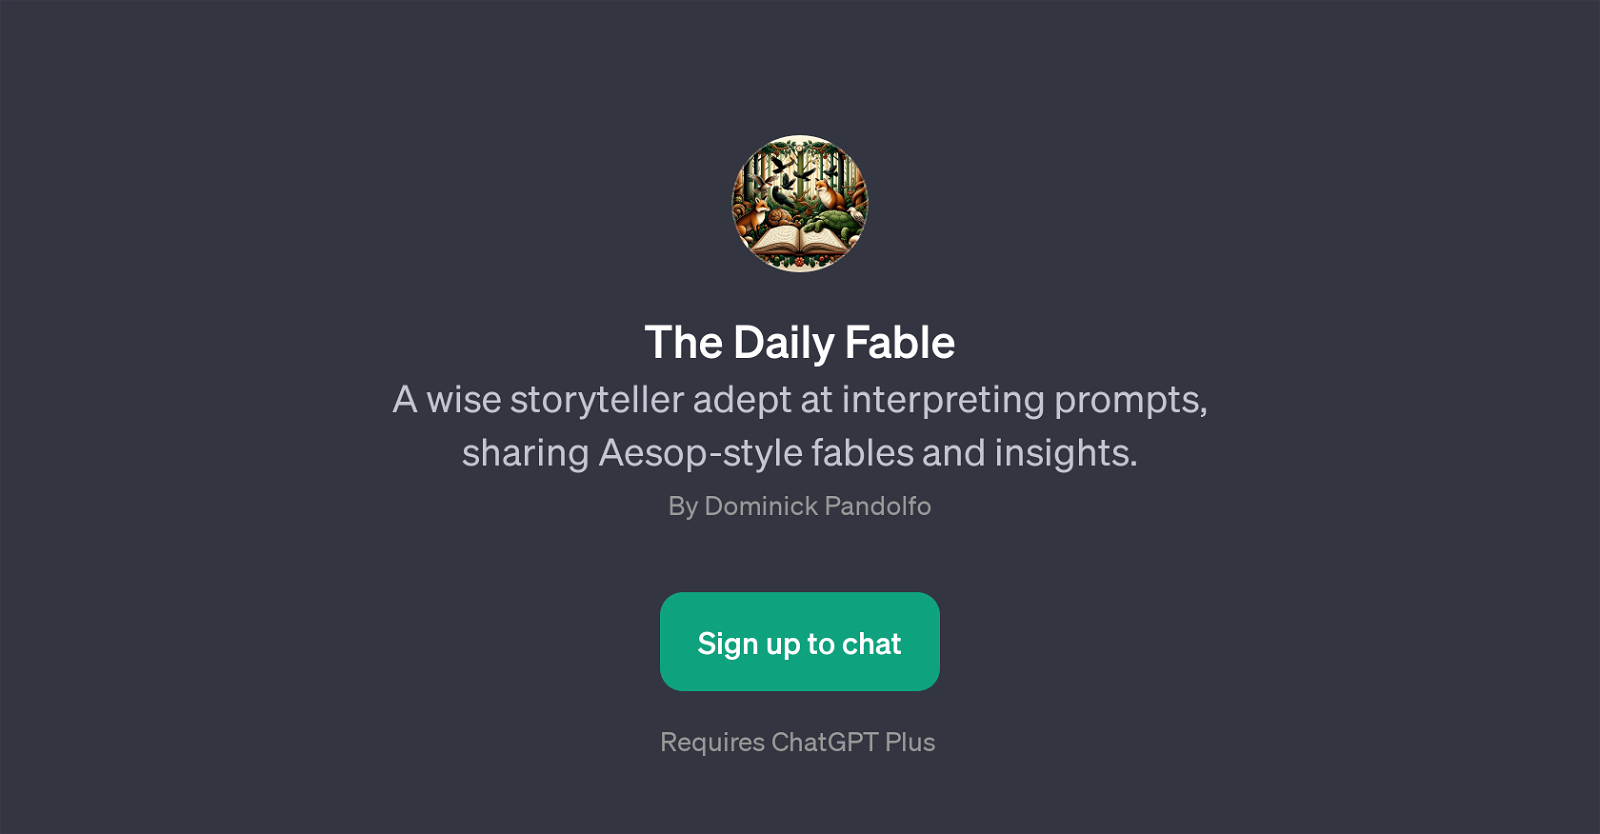 The Daily Fable website